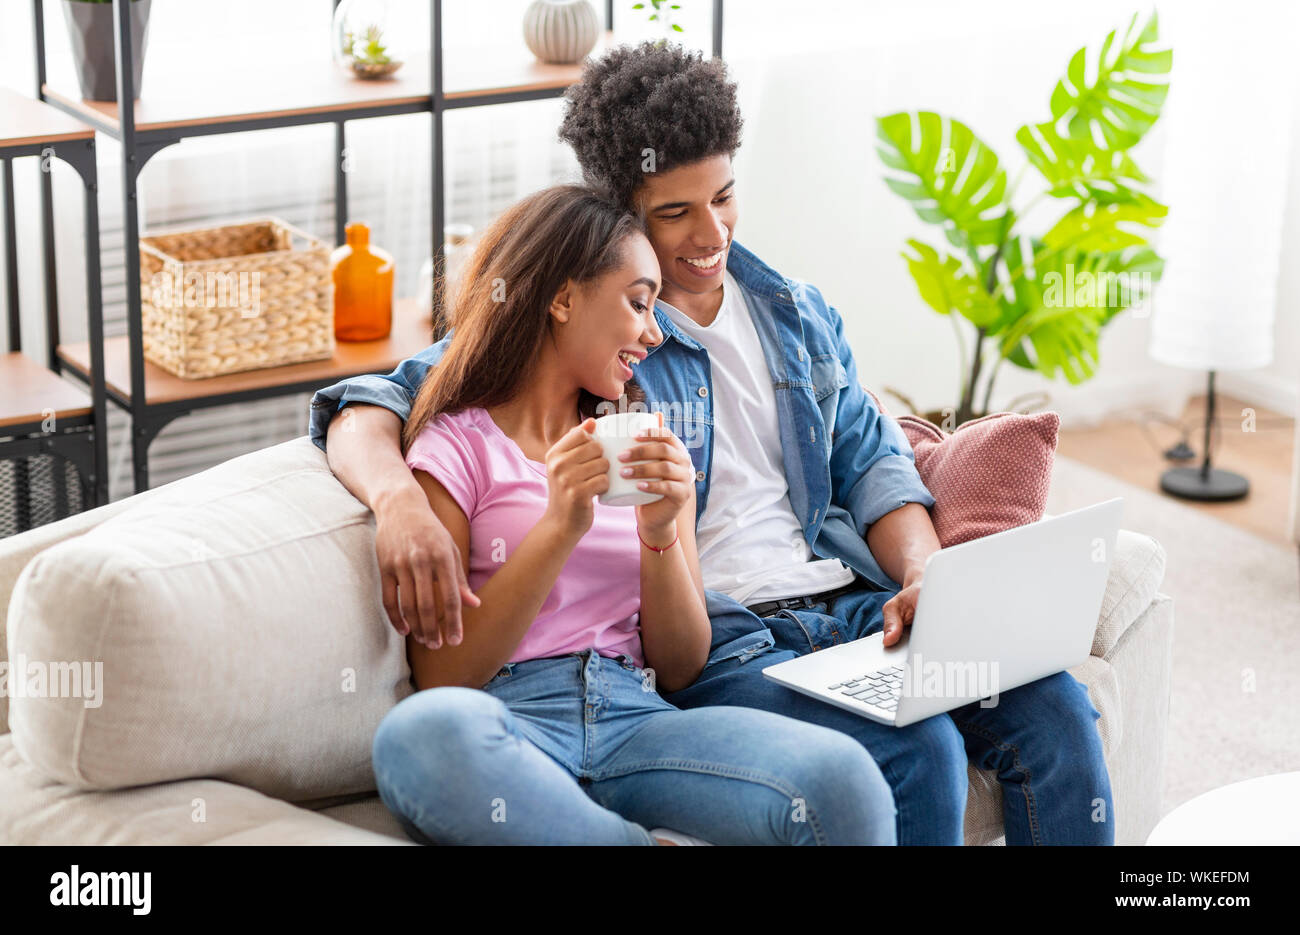 Smiling teenagers watching funny video on laptop at home Stock Photo